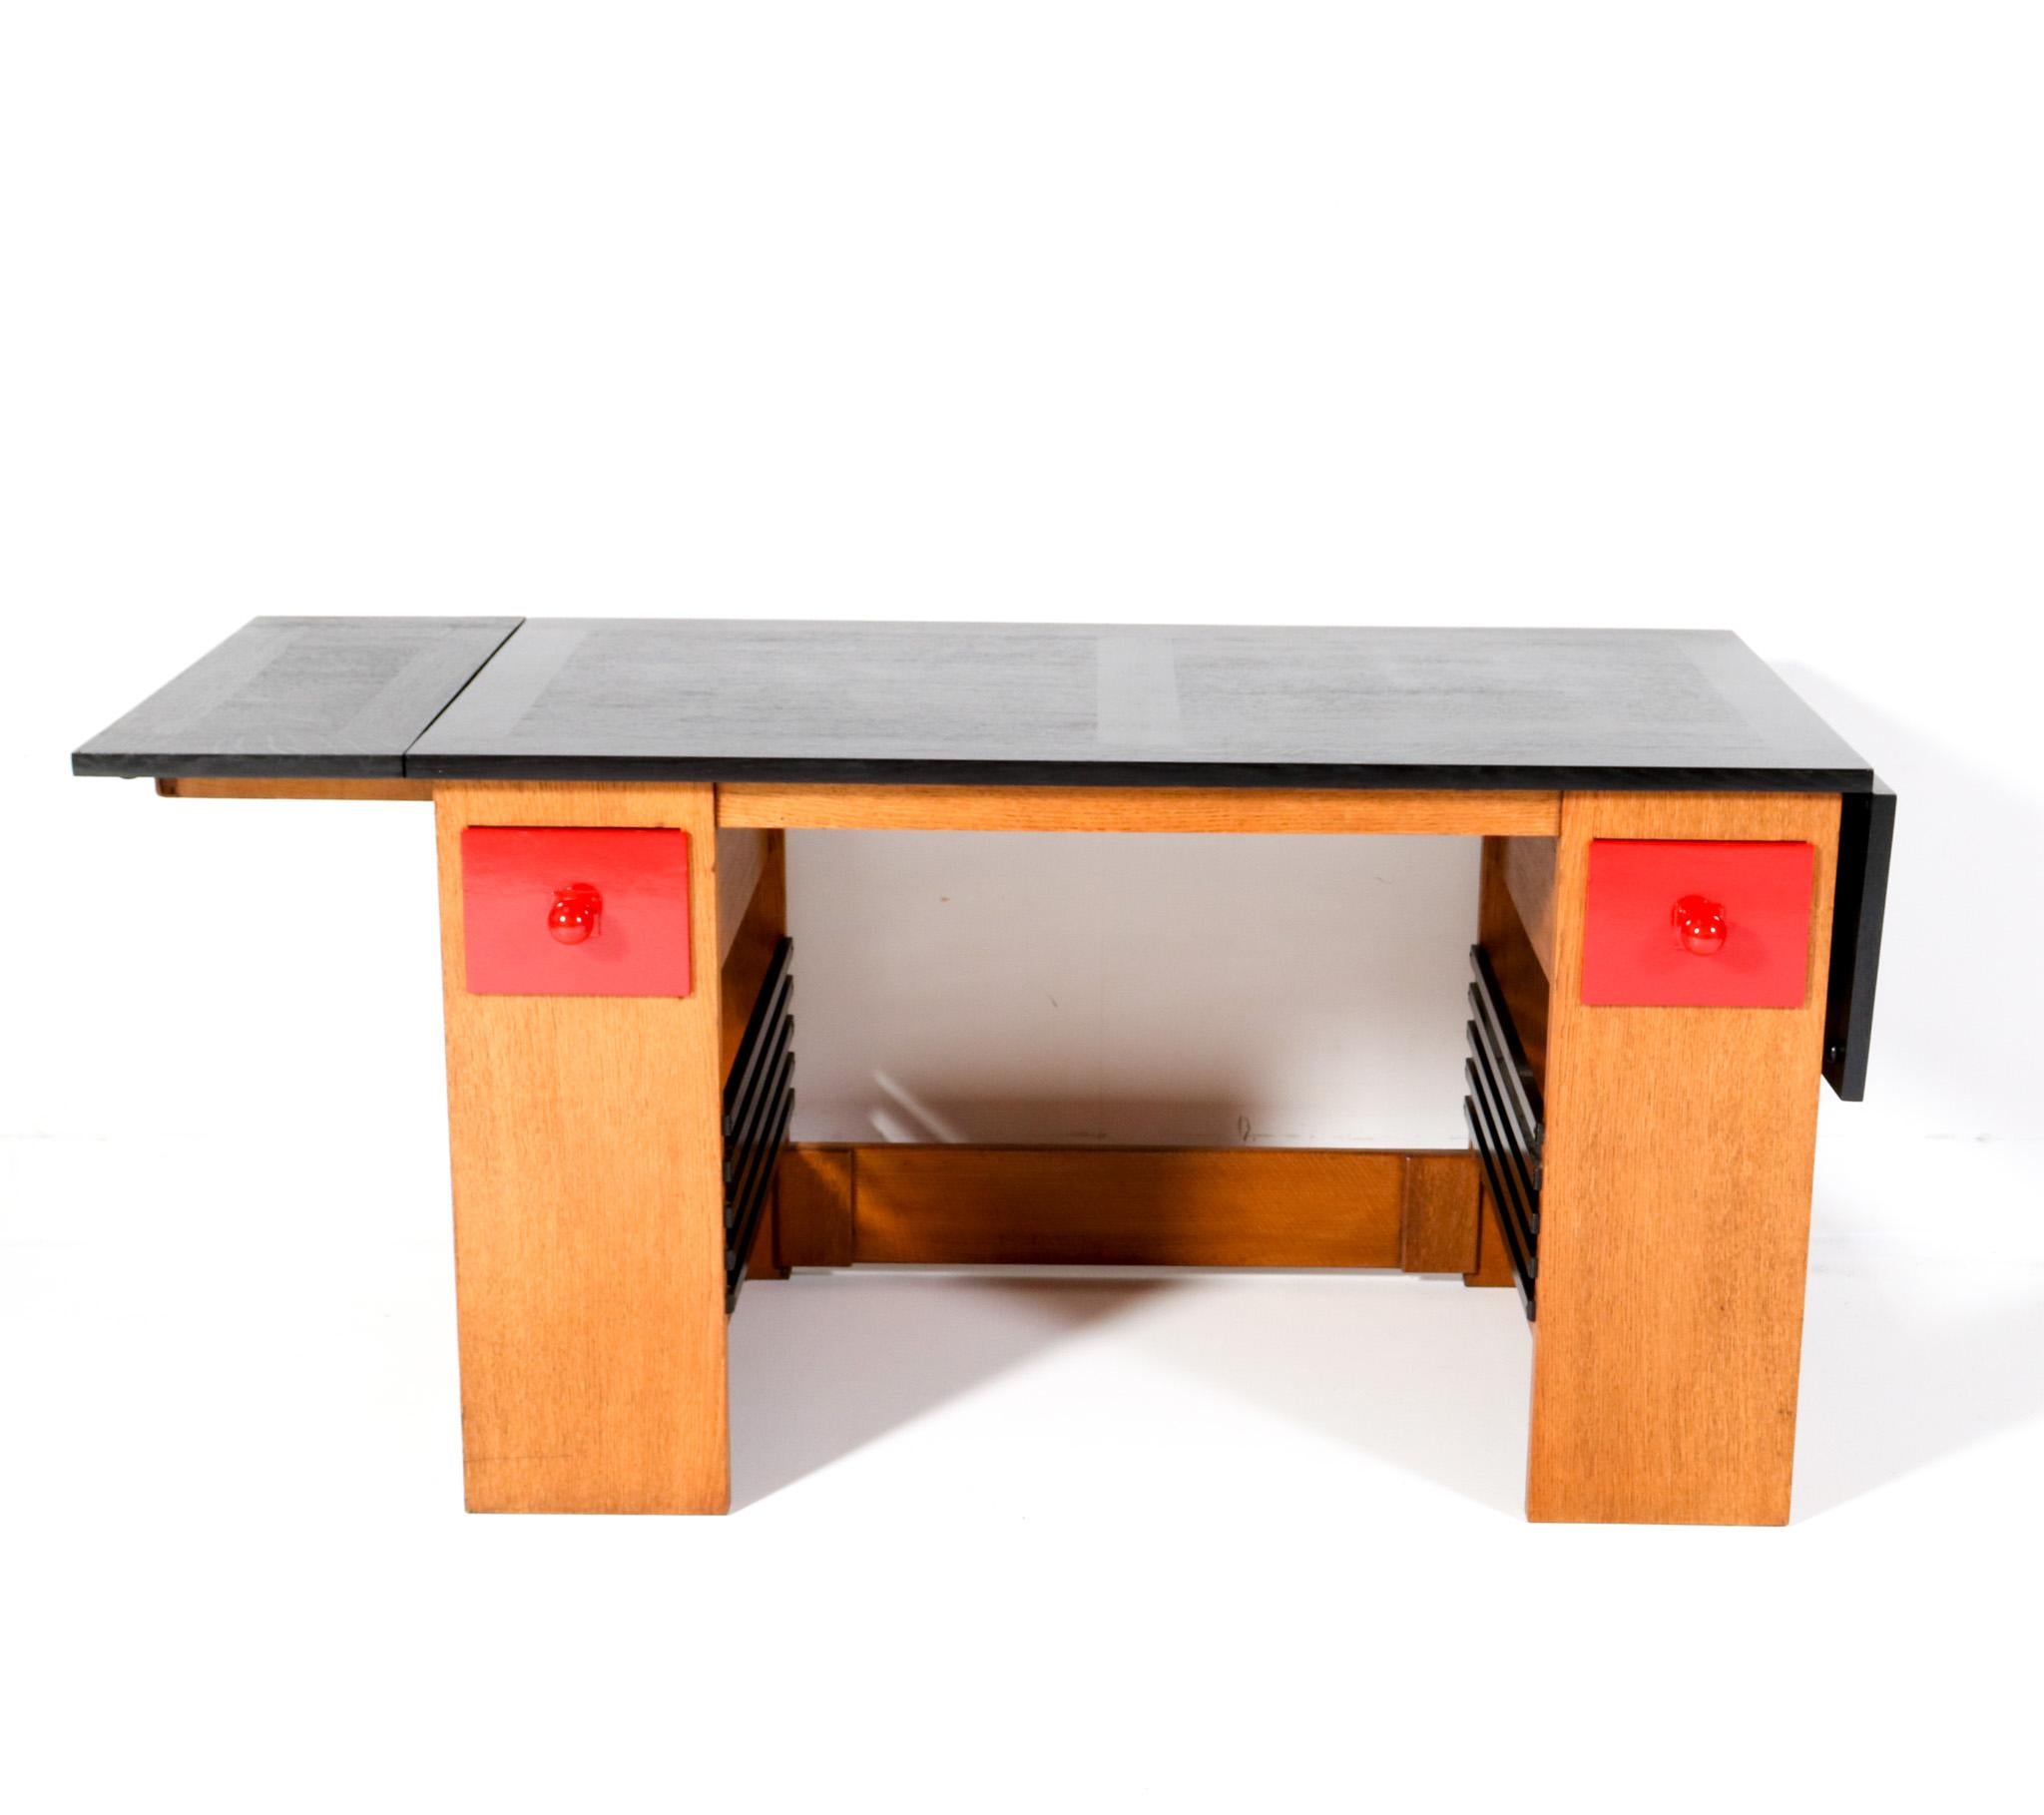 Early 20th Century Oak Art Deco Modernist Desk or Writing Table by Hendrik Wouda for Pander, 1920s For Sale